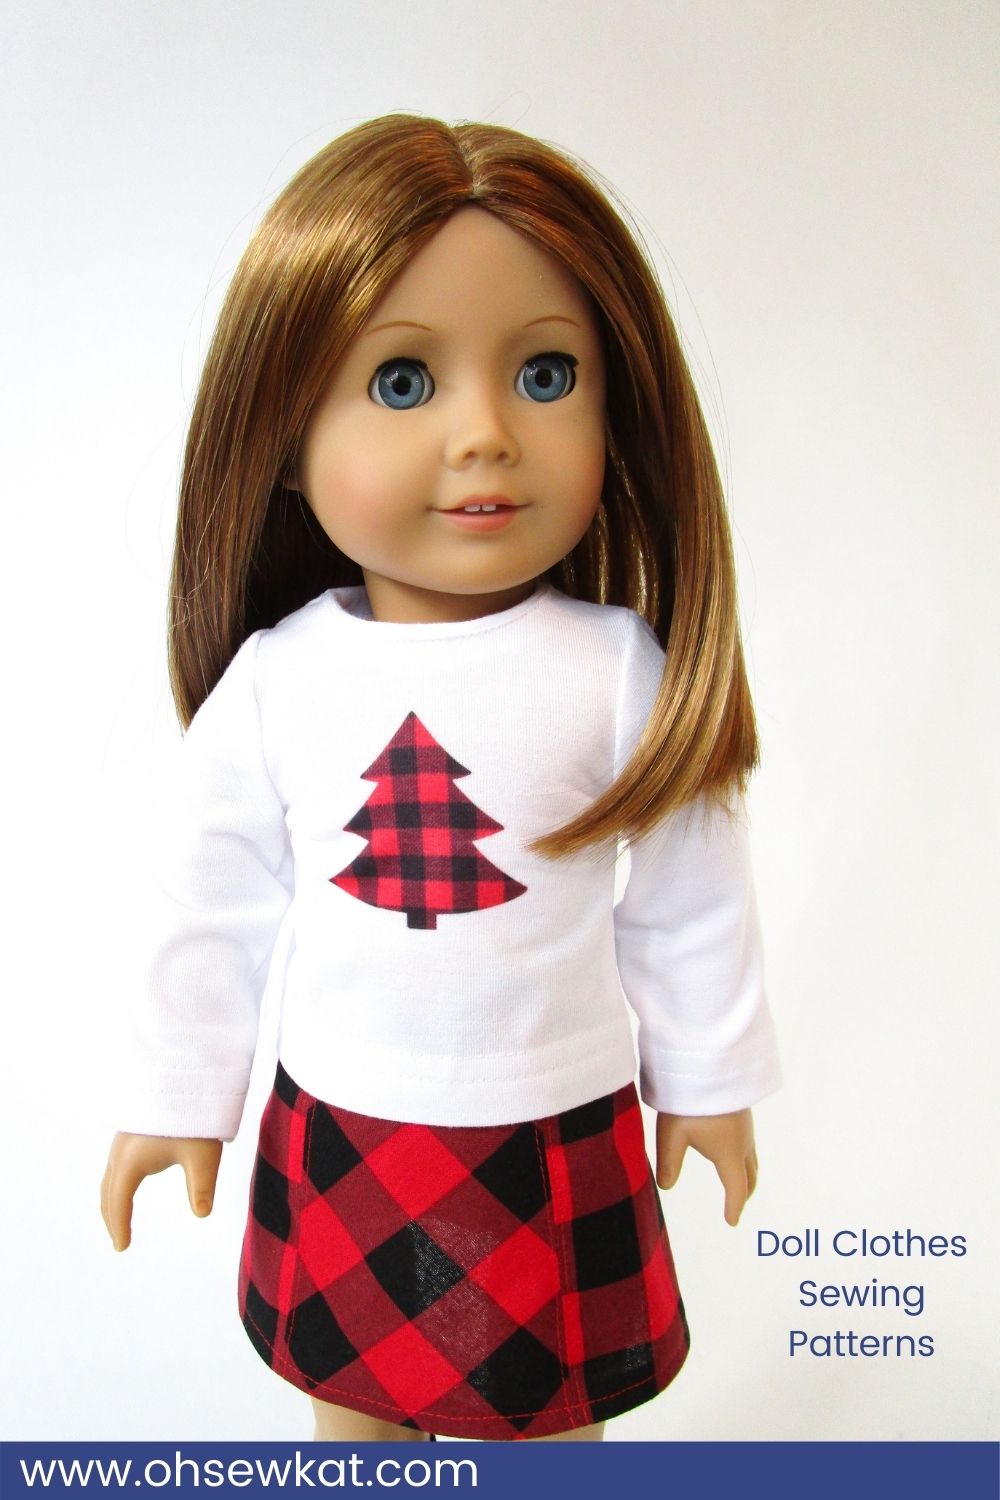 Create your own custom doll tee shirts with Cricut and Infusible Ink transfer sheets. Find a quick and easy tutorial to turn an adult shirt into many doll tees that you can design and sew yourself at OhSewKat!